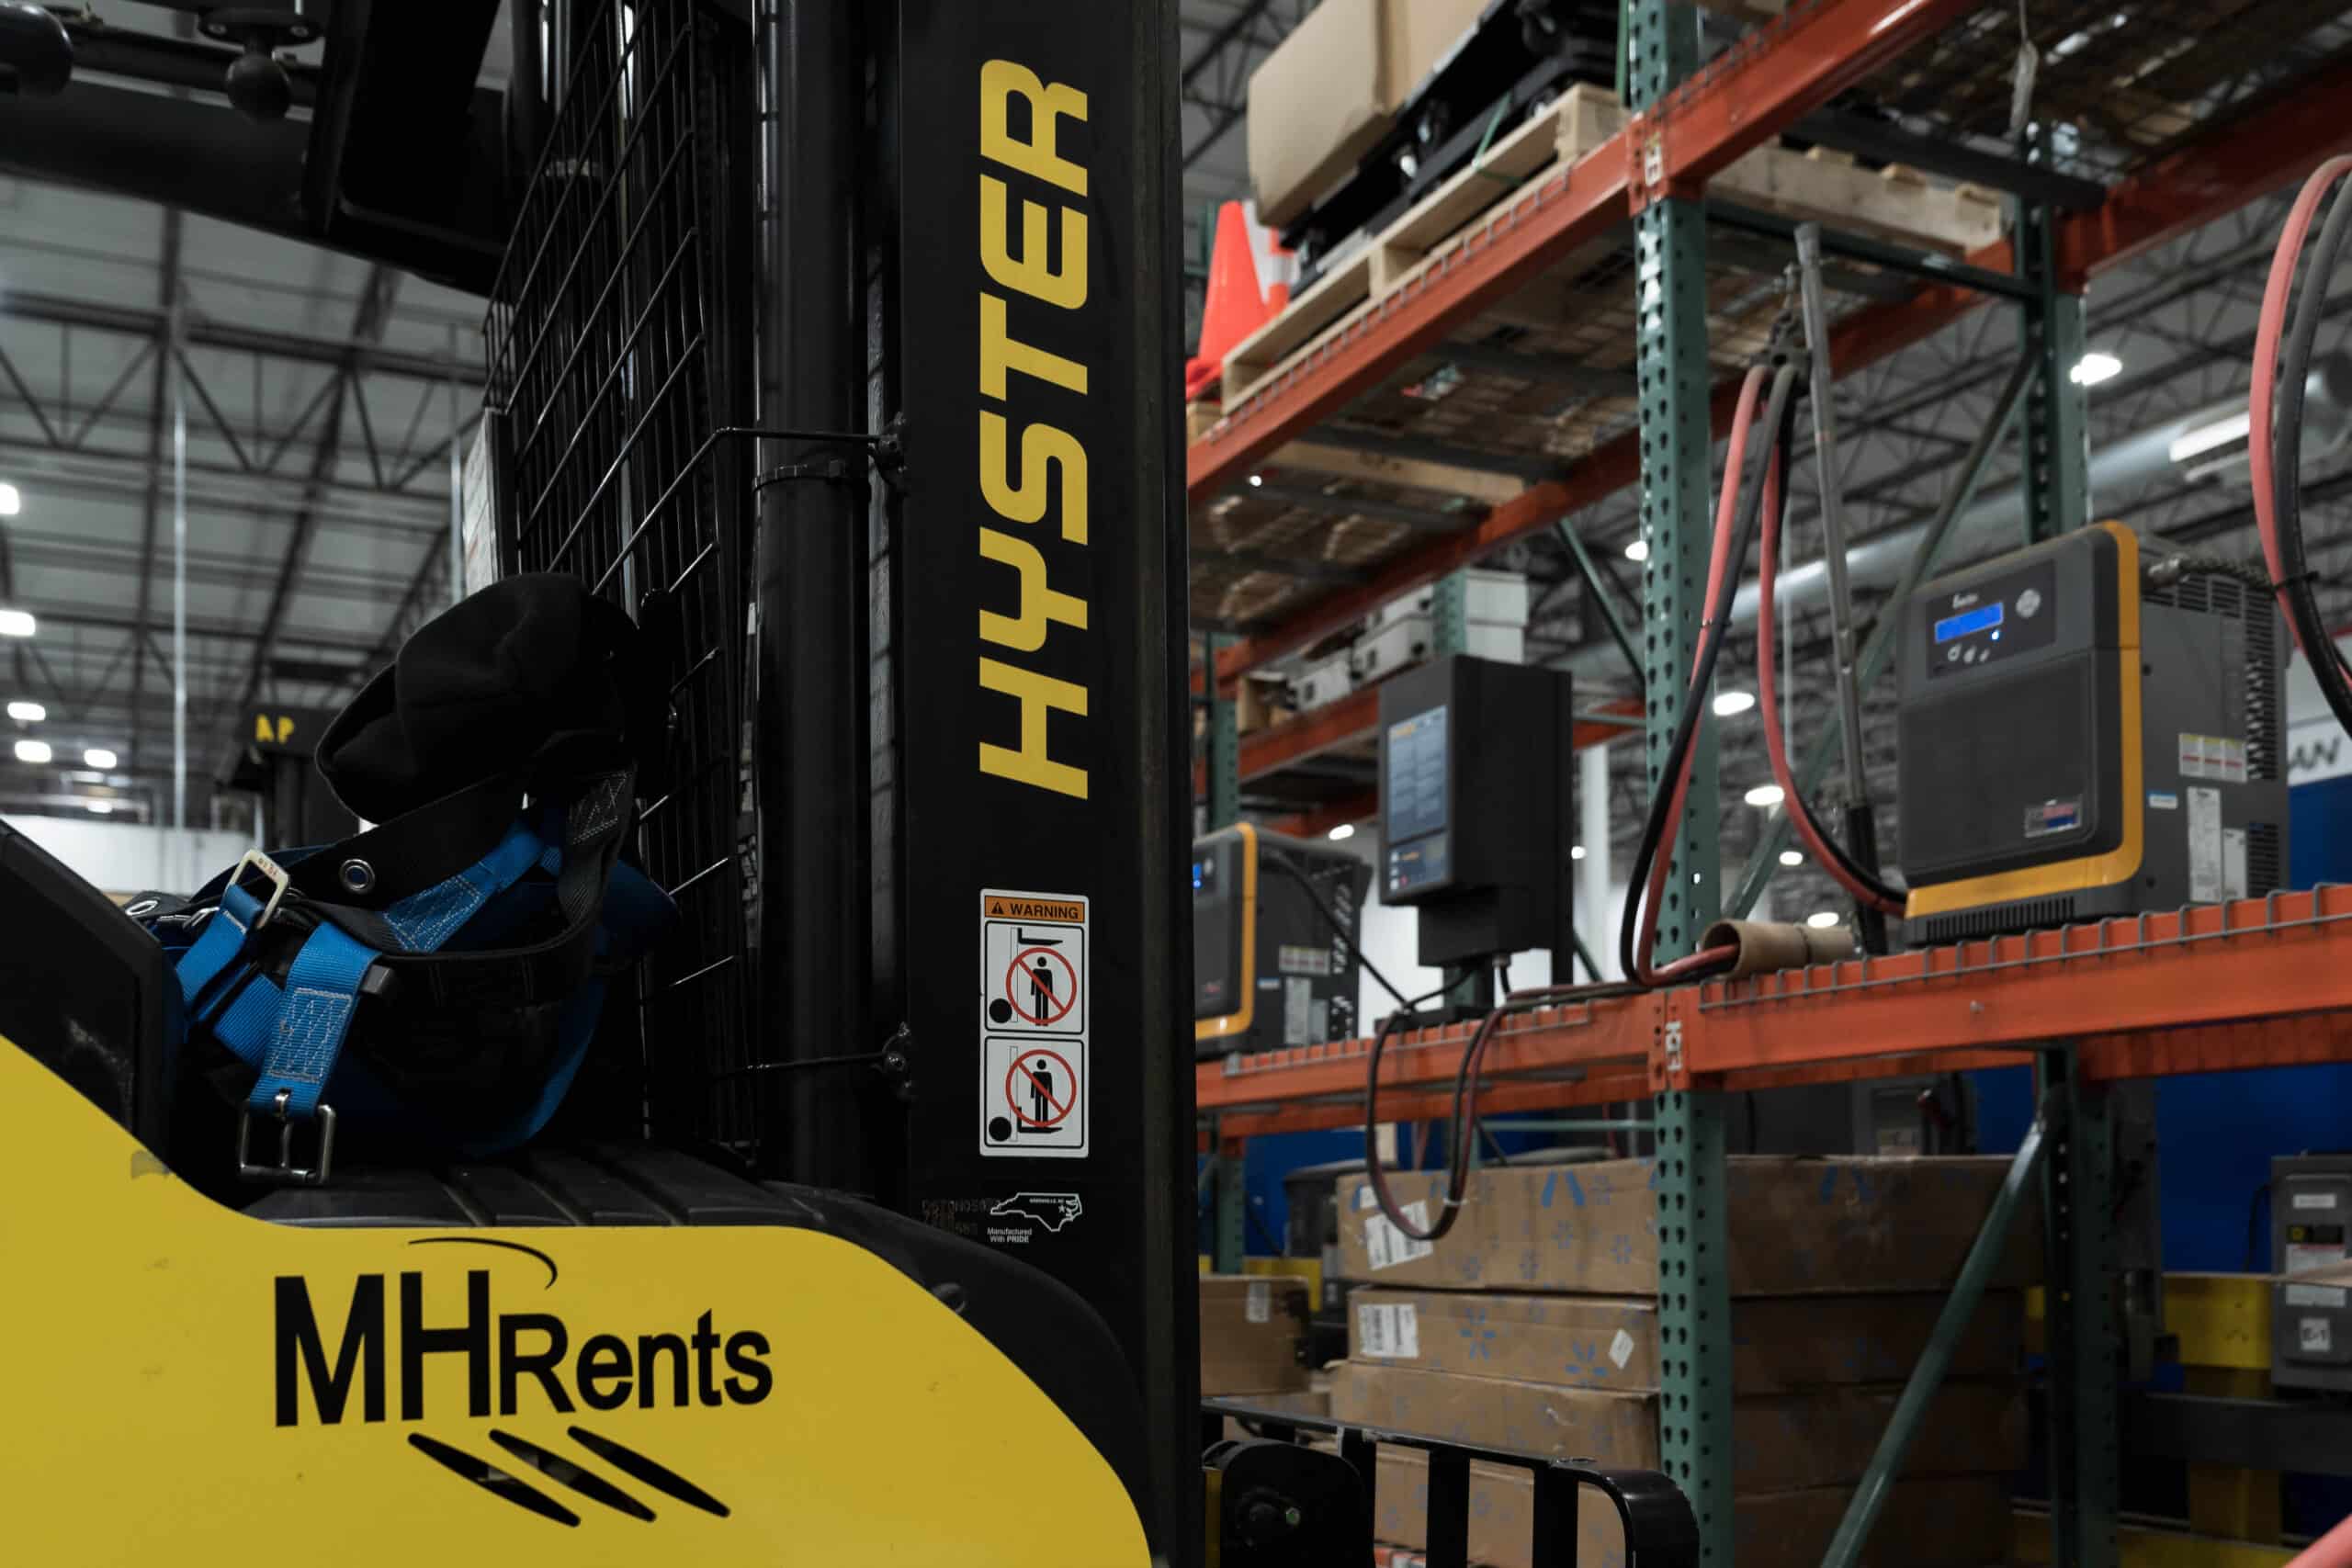  MH Rents - Hyster - DSC05282